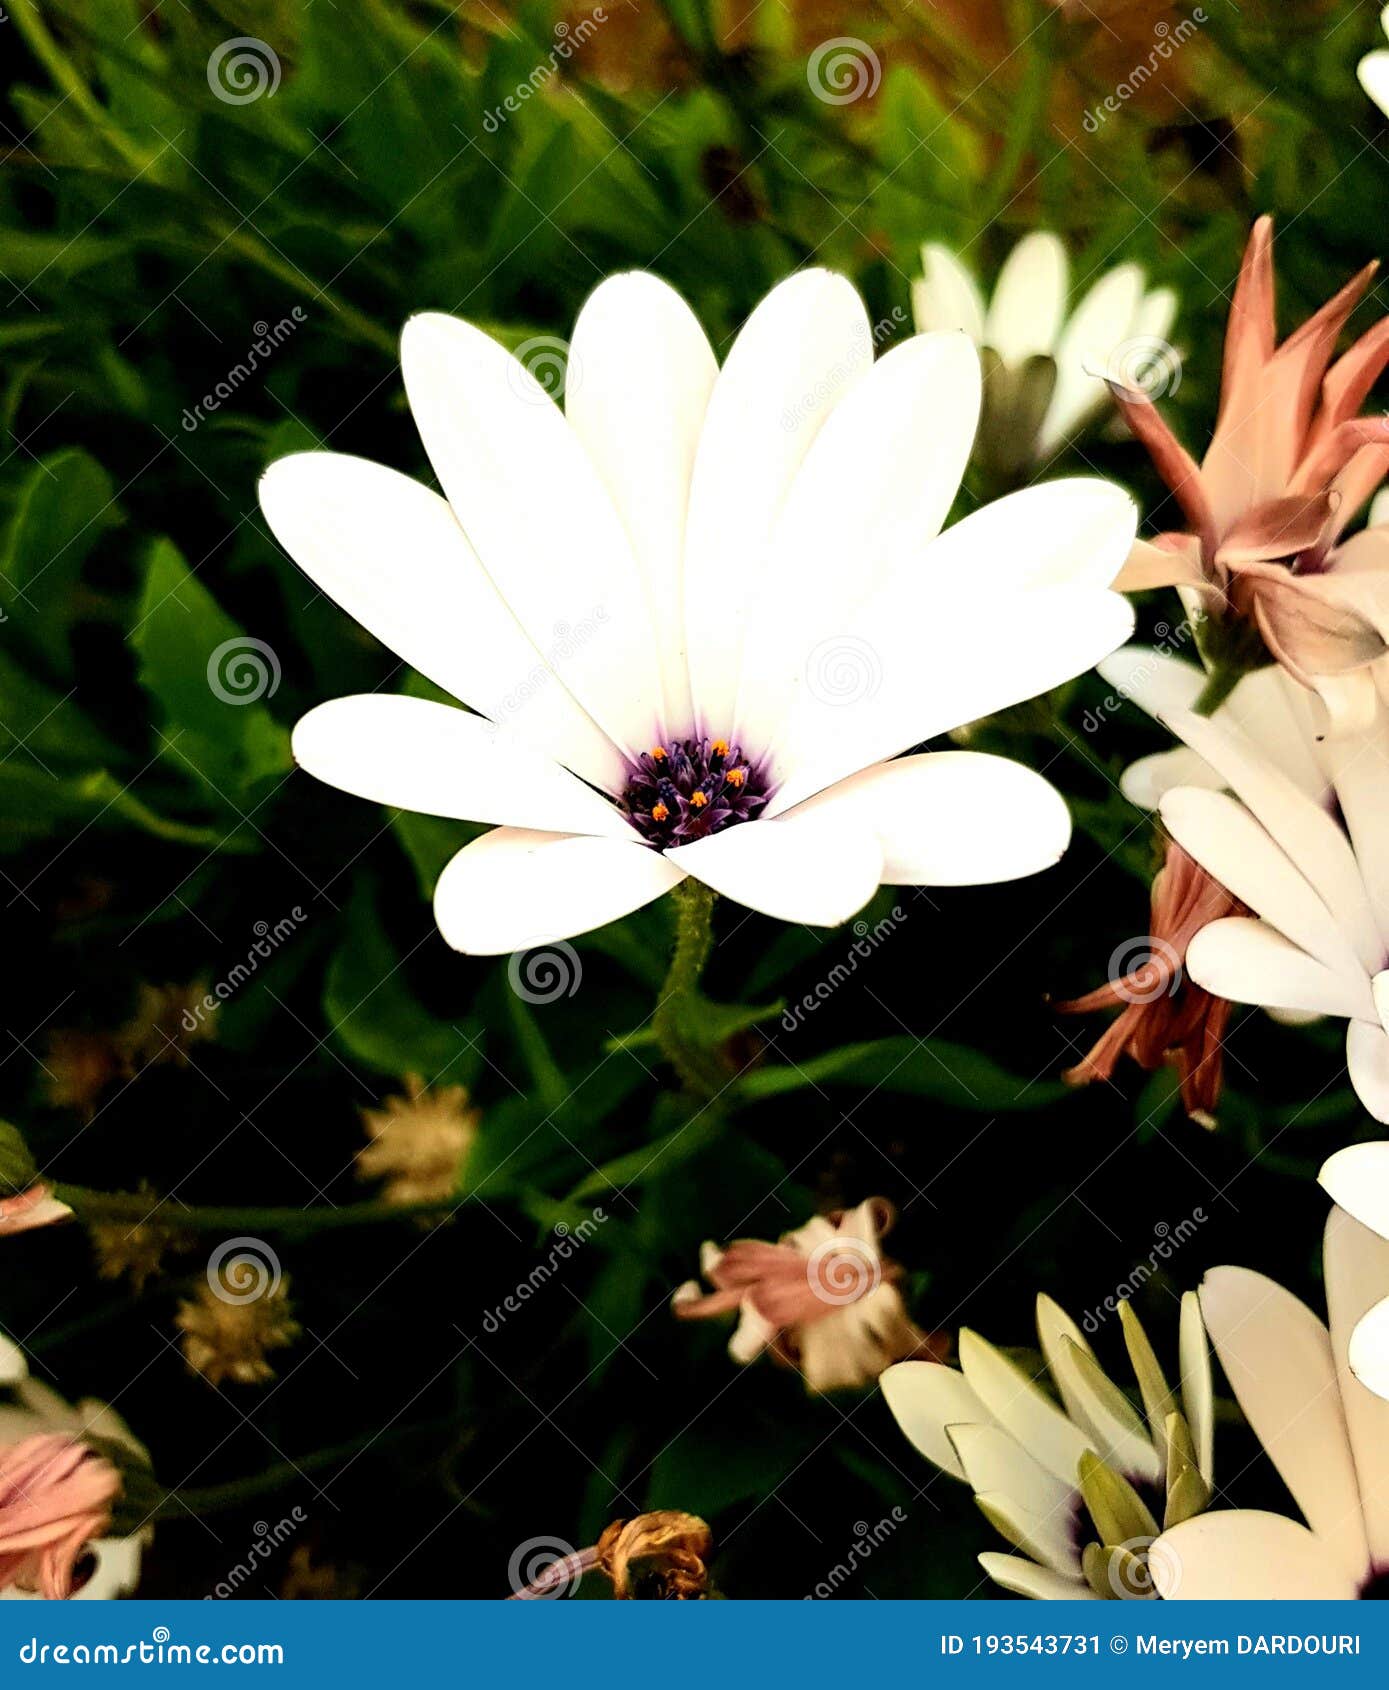 White Flower With A Purple Center Stock Image Image Of Amazing